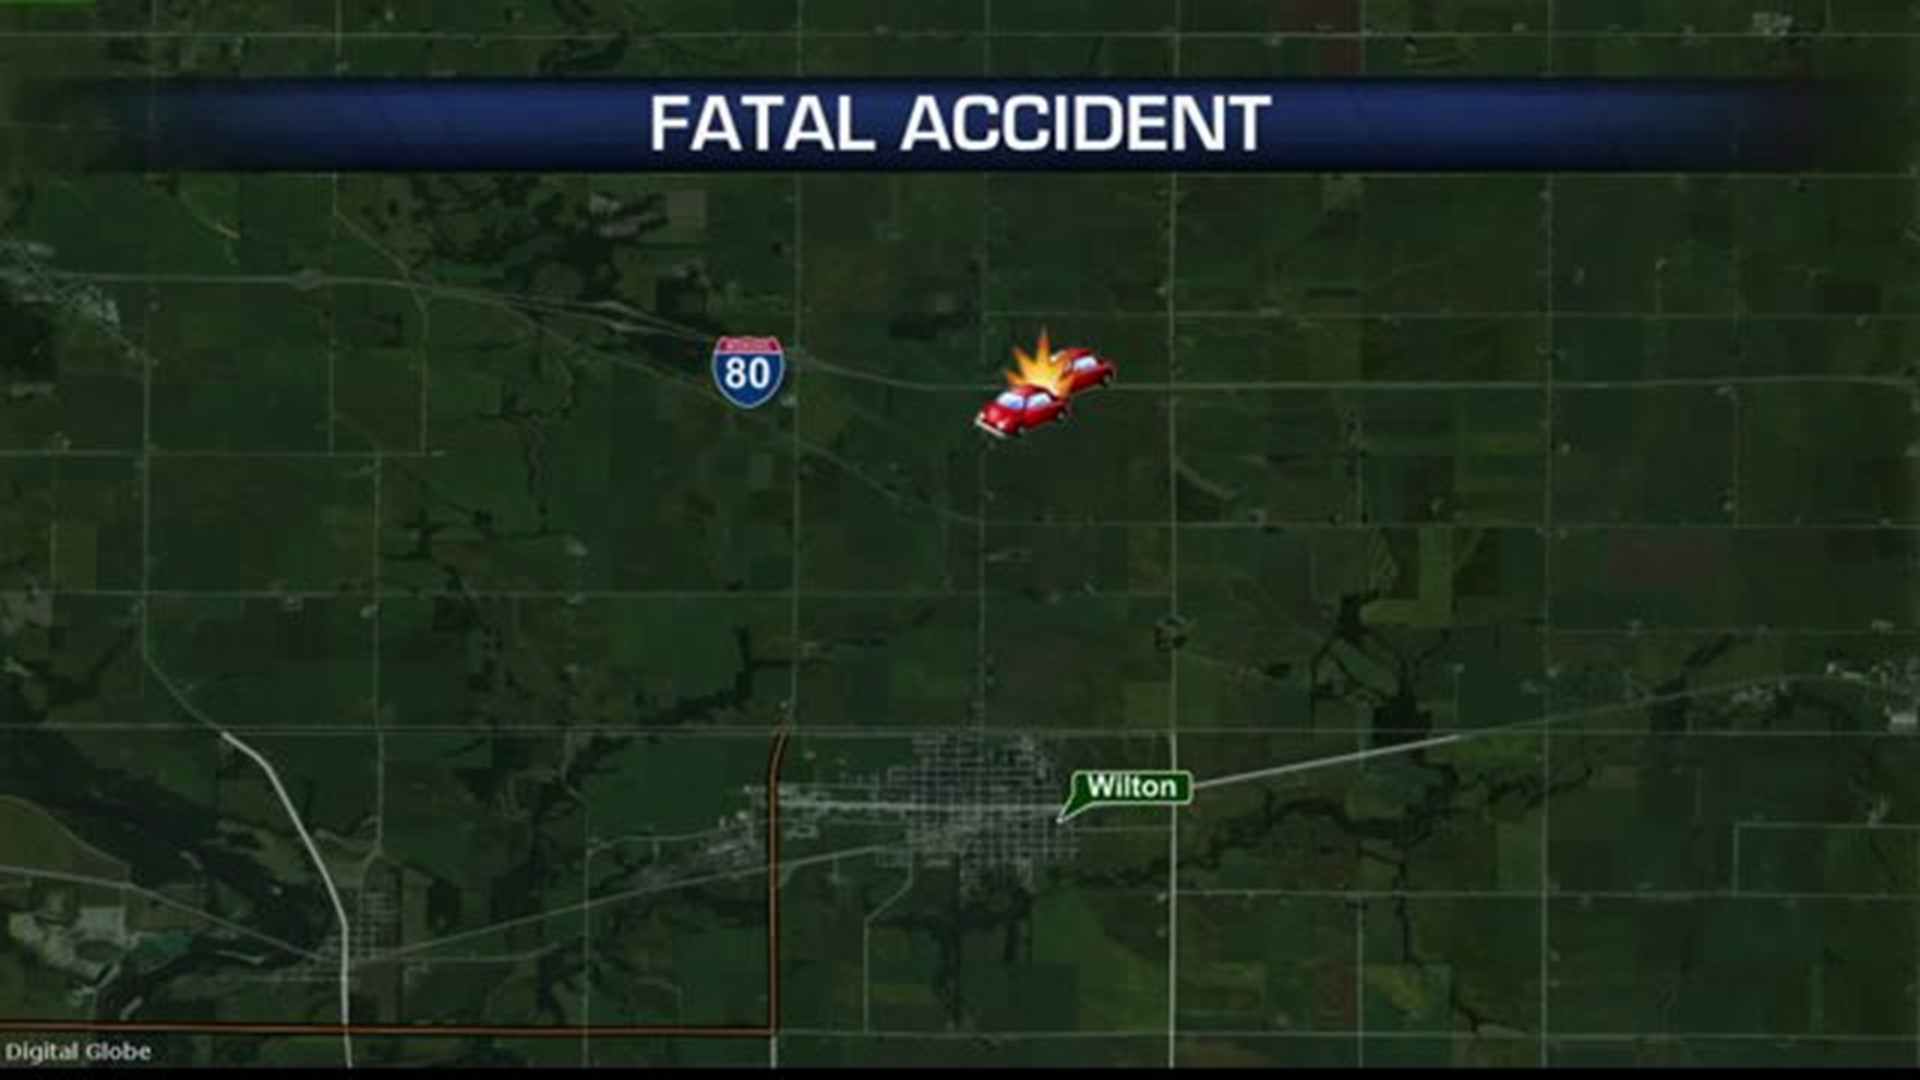 Two Muscatine resident killed in I-80 crash